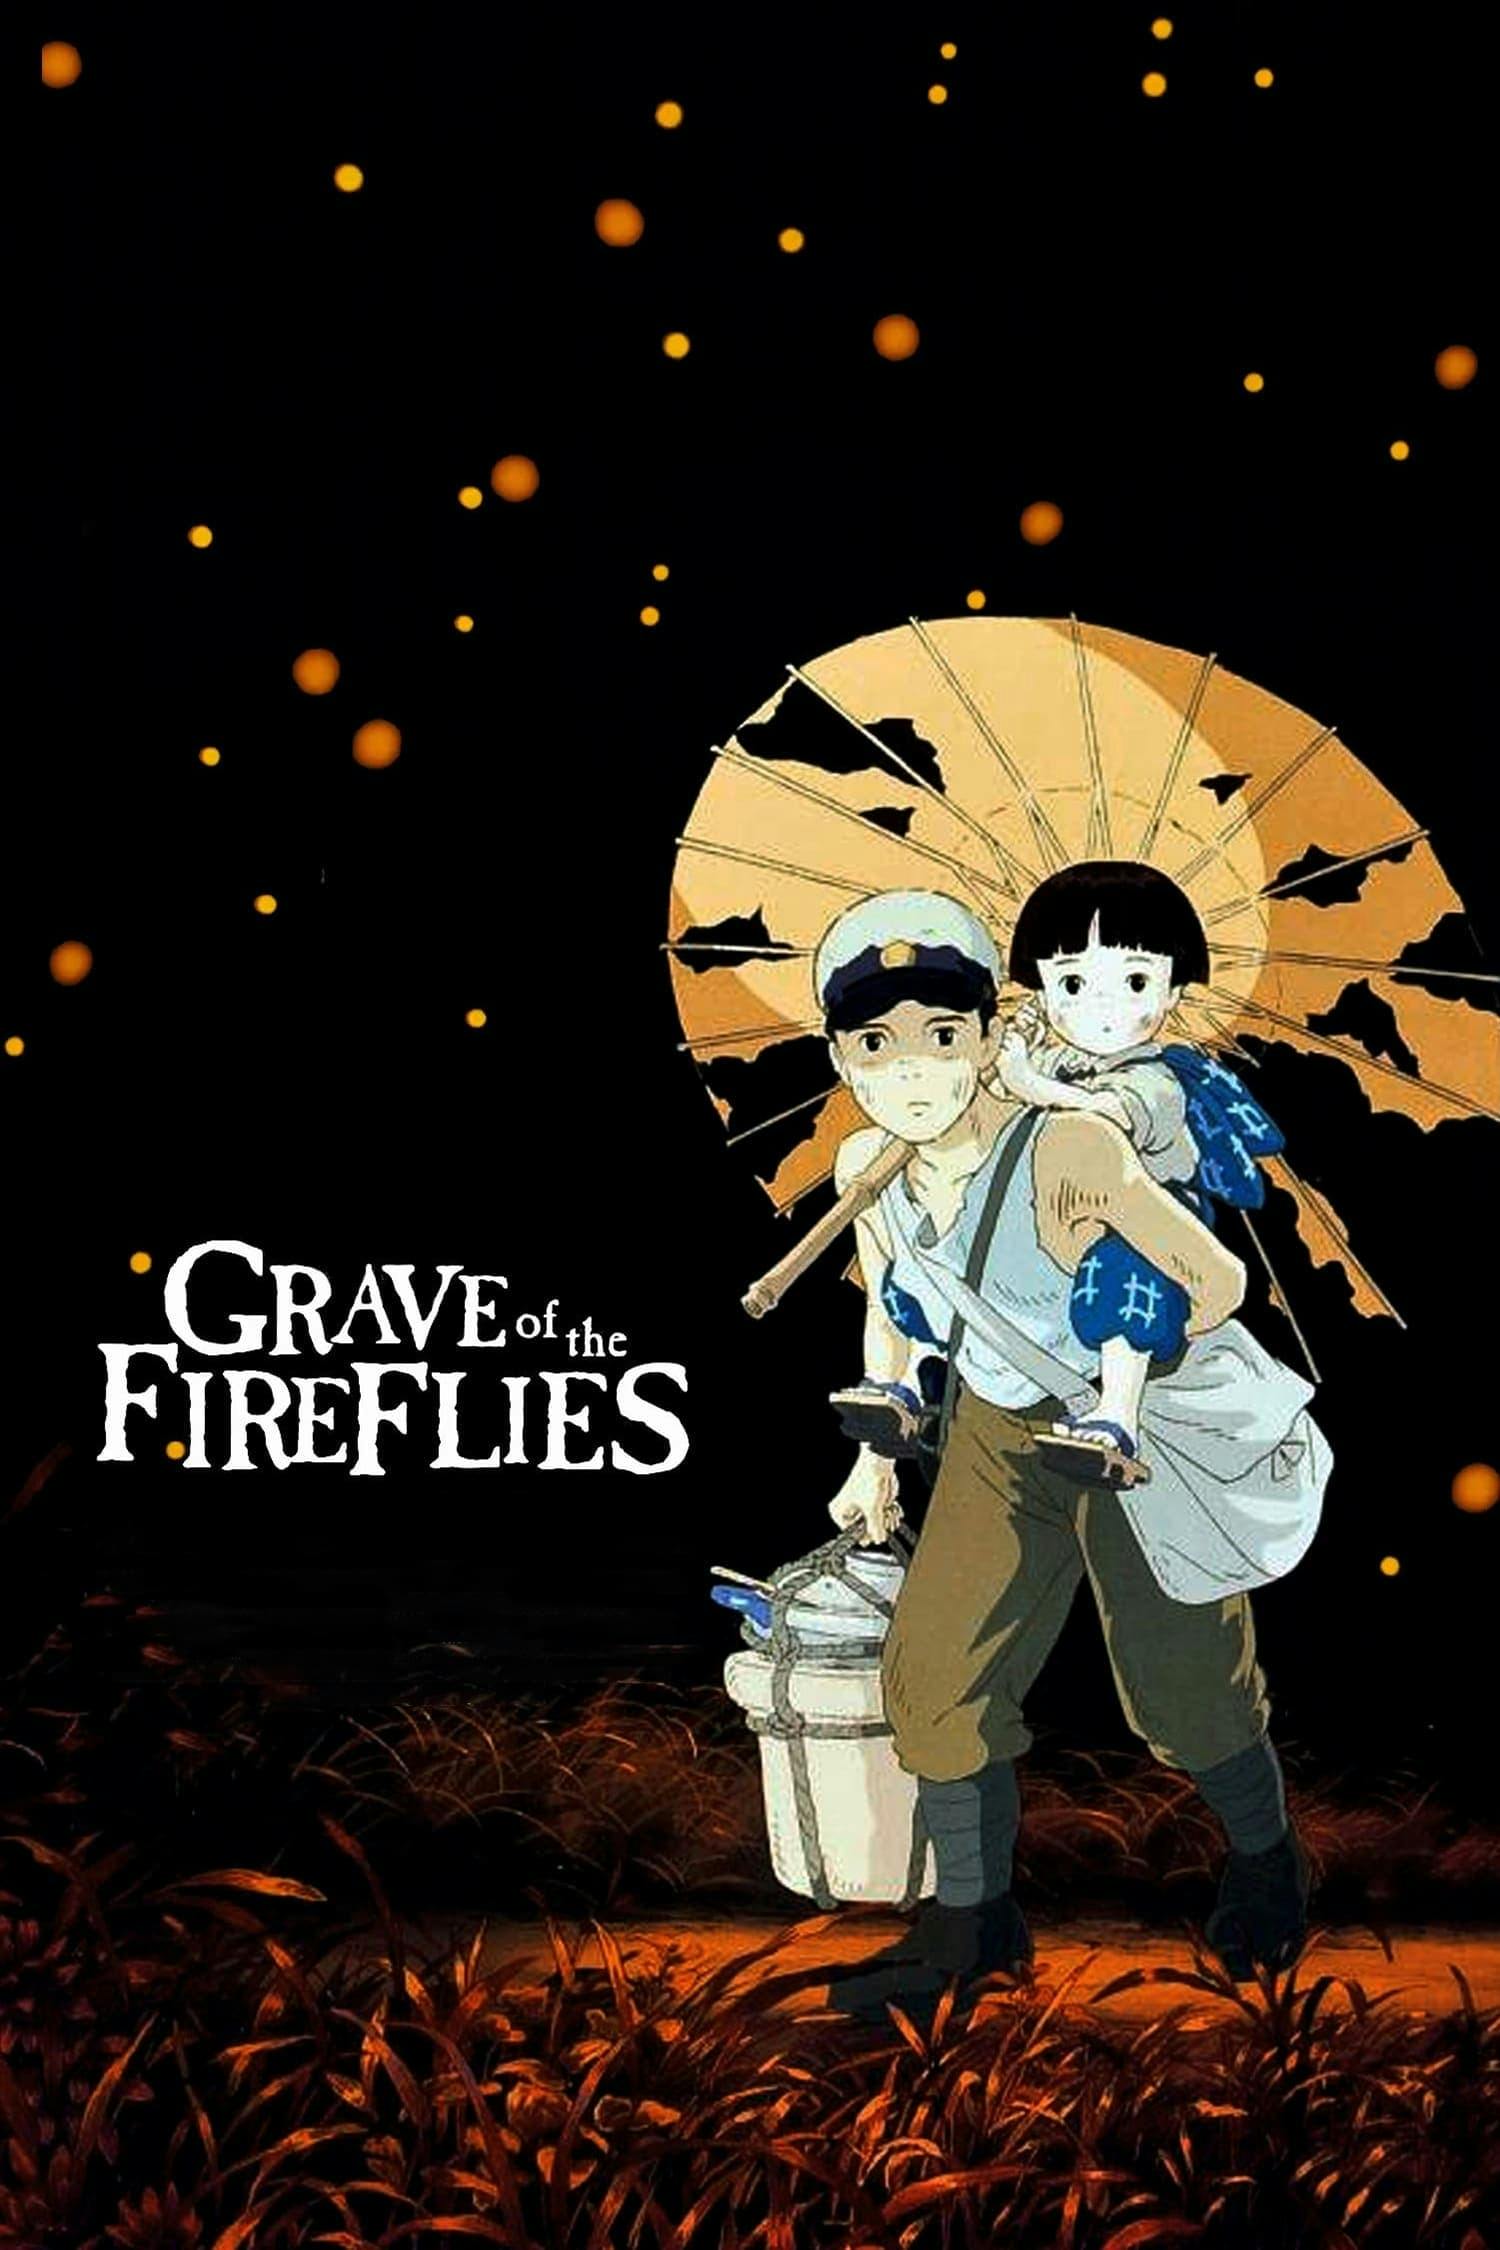 Movie poster of "Grave of the Fireflies"